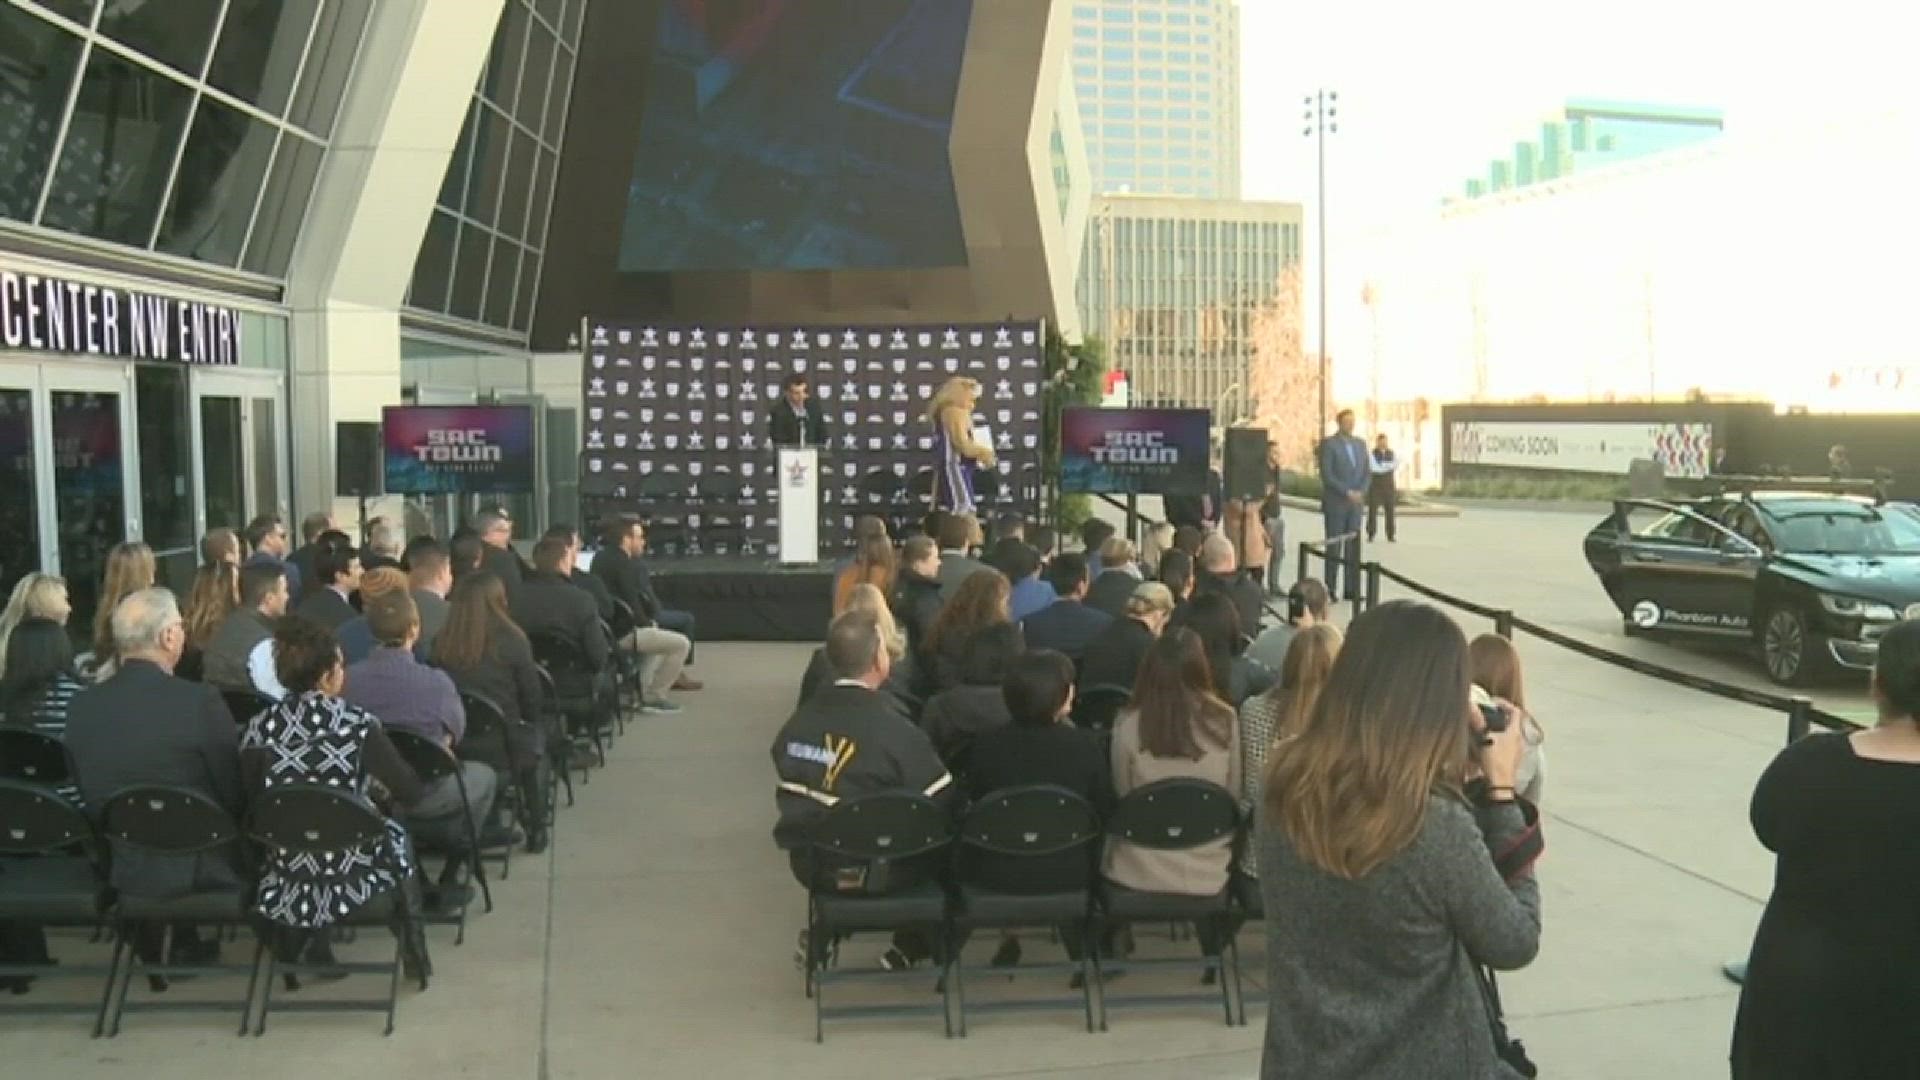 Sacramento Kings owner Vivek Ranadive, joined by Mayor Darrell Steinberg, Congresswoman Doris Matsui, team general manager Vlade Divac and others, announce their bid for the 2022 or 2023 NBA All-Star Game on Thursday morning outside of the Golden 1 Center